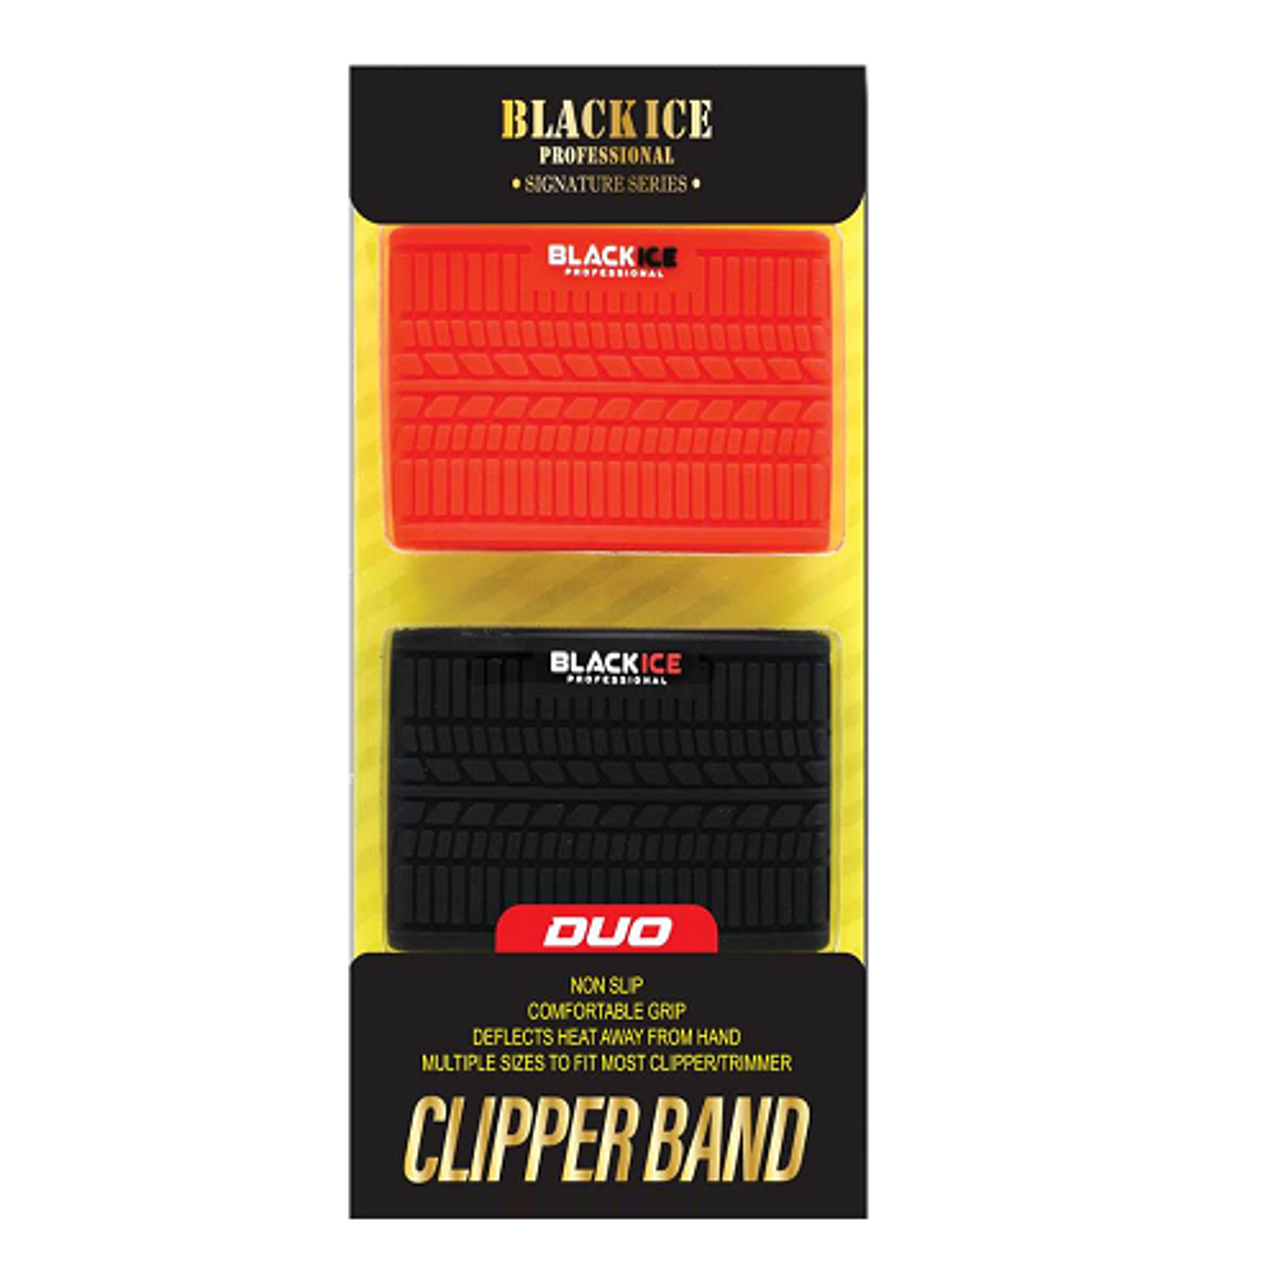 Black Ice Professional DUO Clipper Band